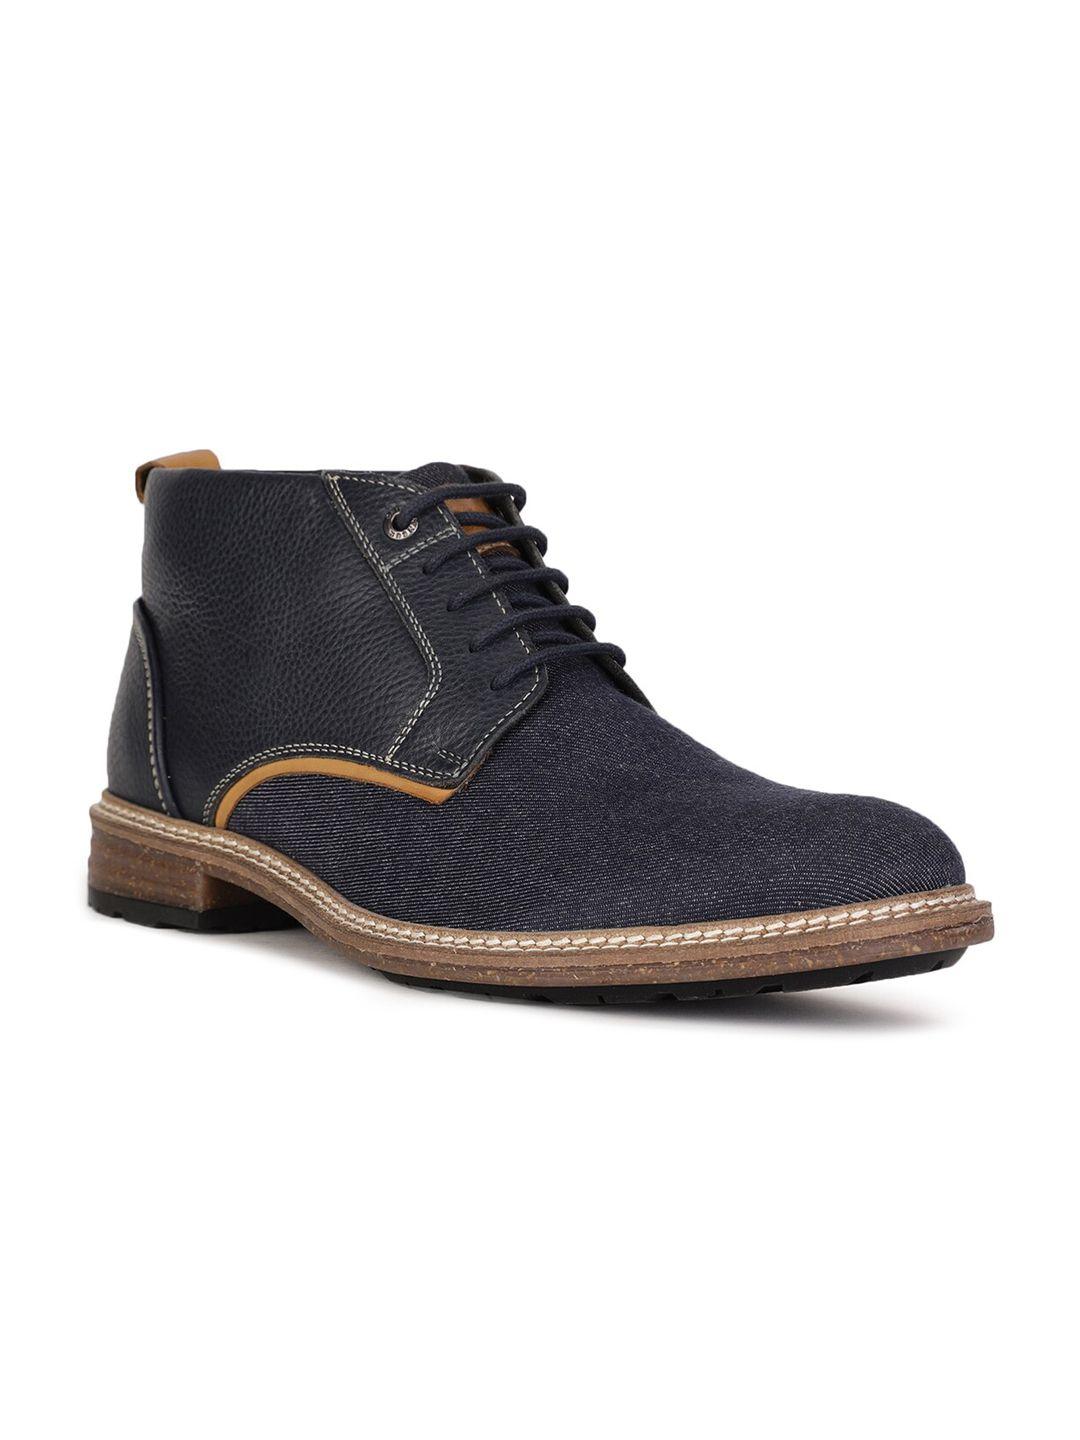 hush puppies men blue leather boots